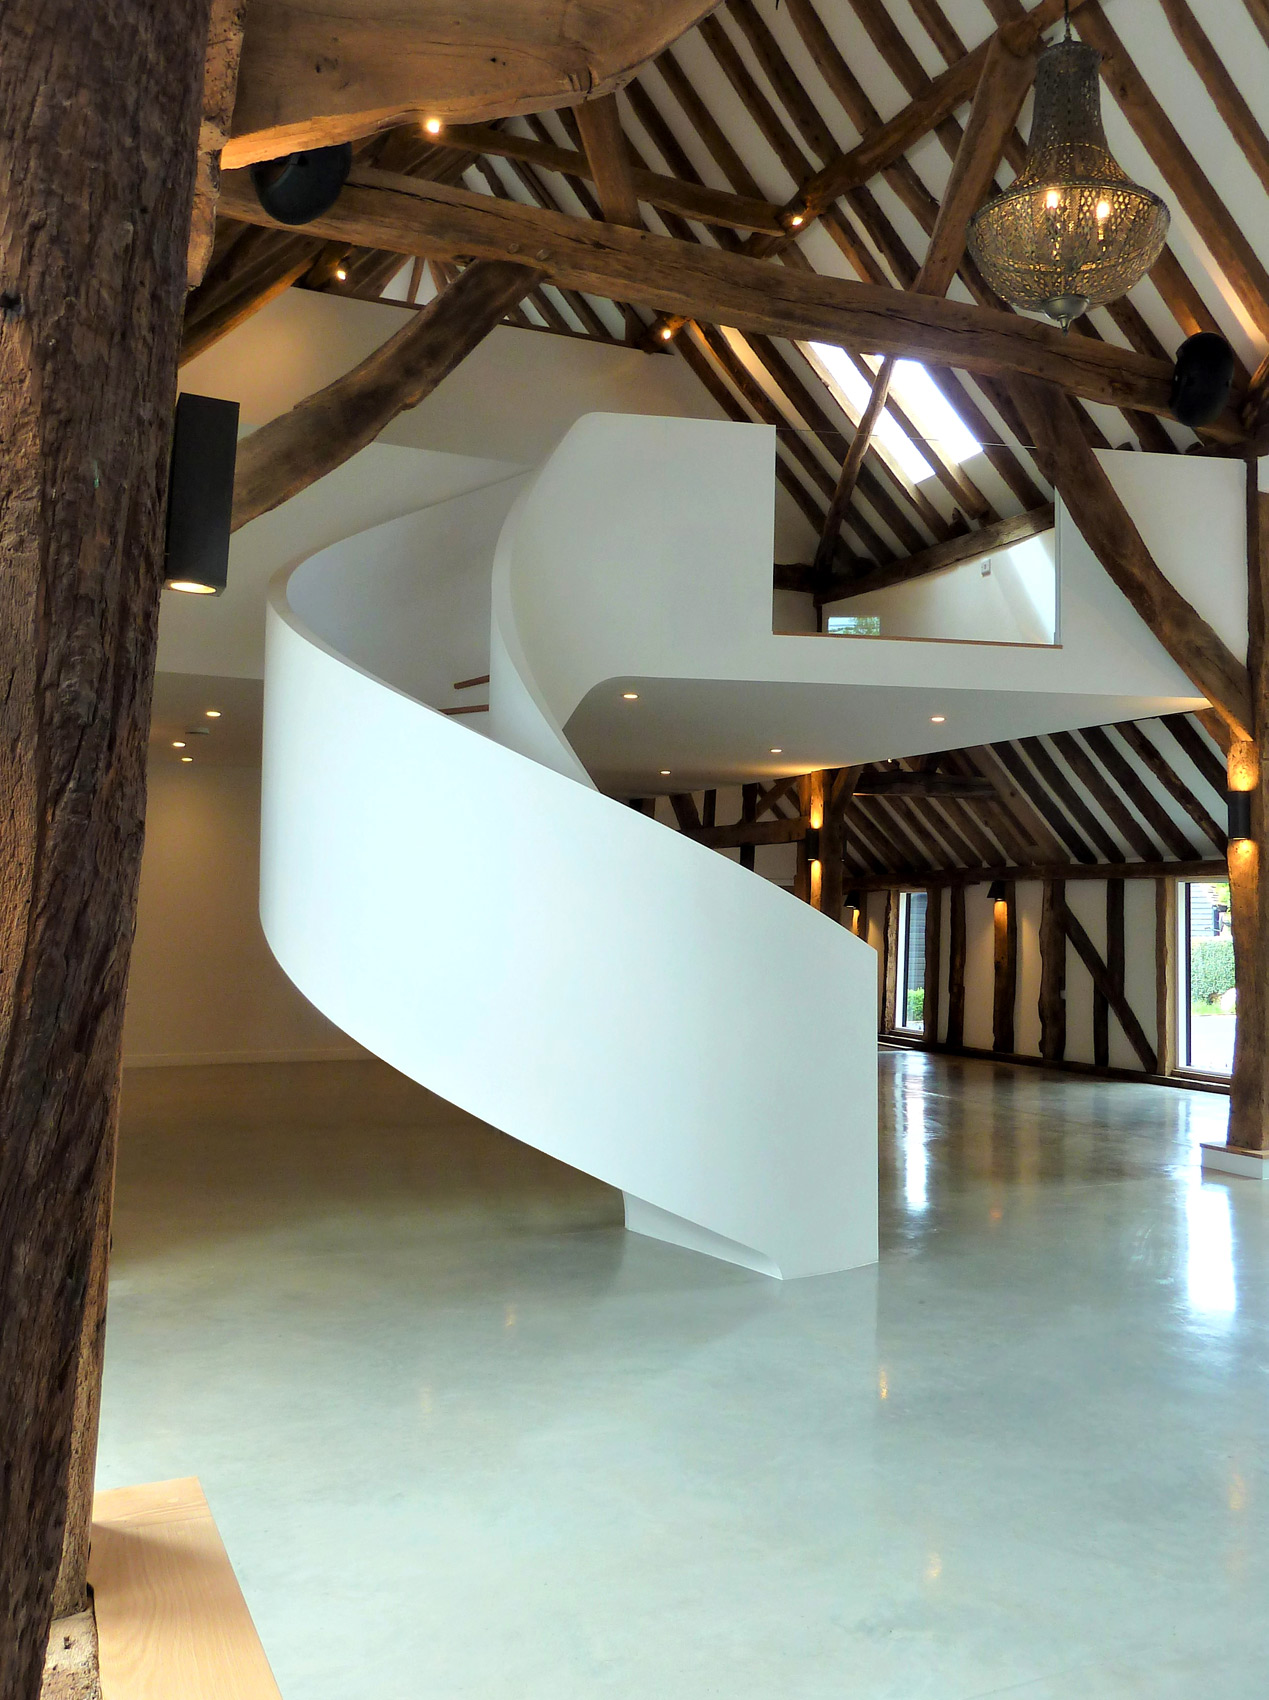 View of new staircase in a barn conversion